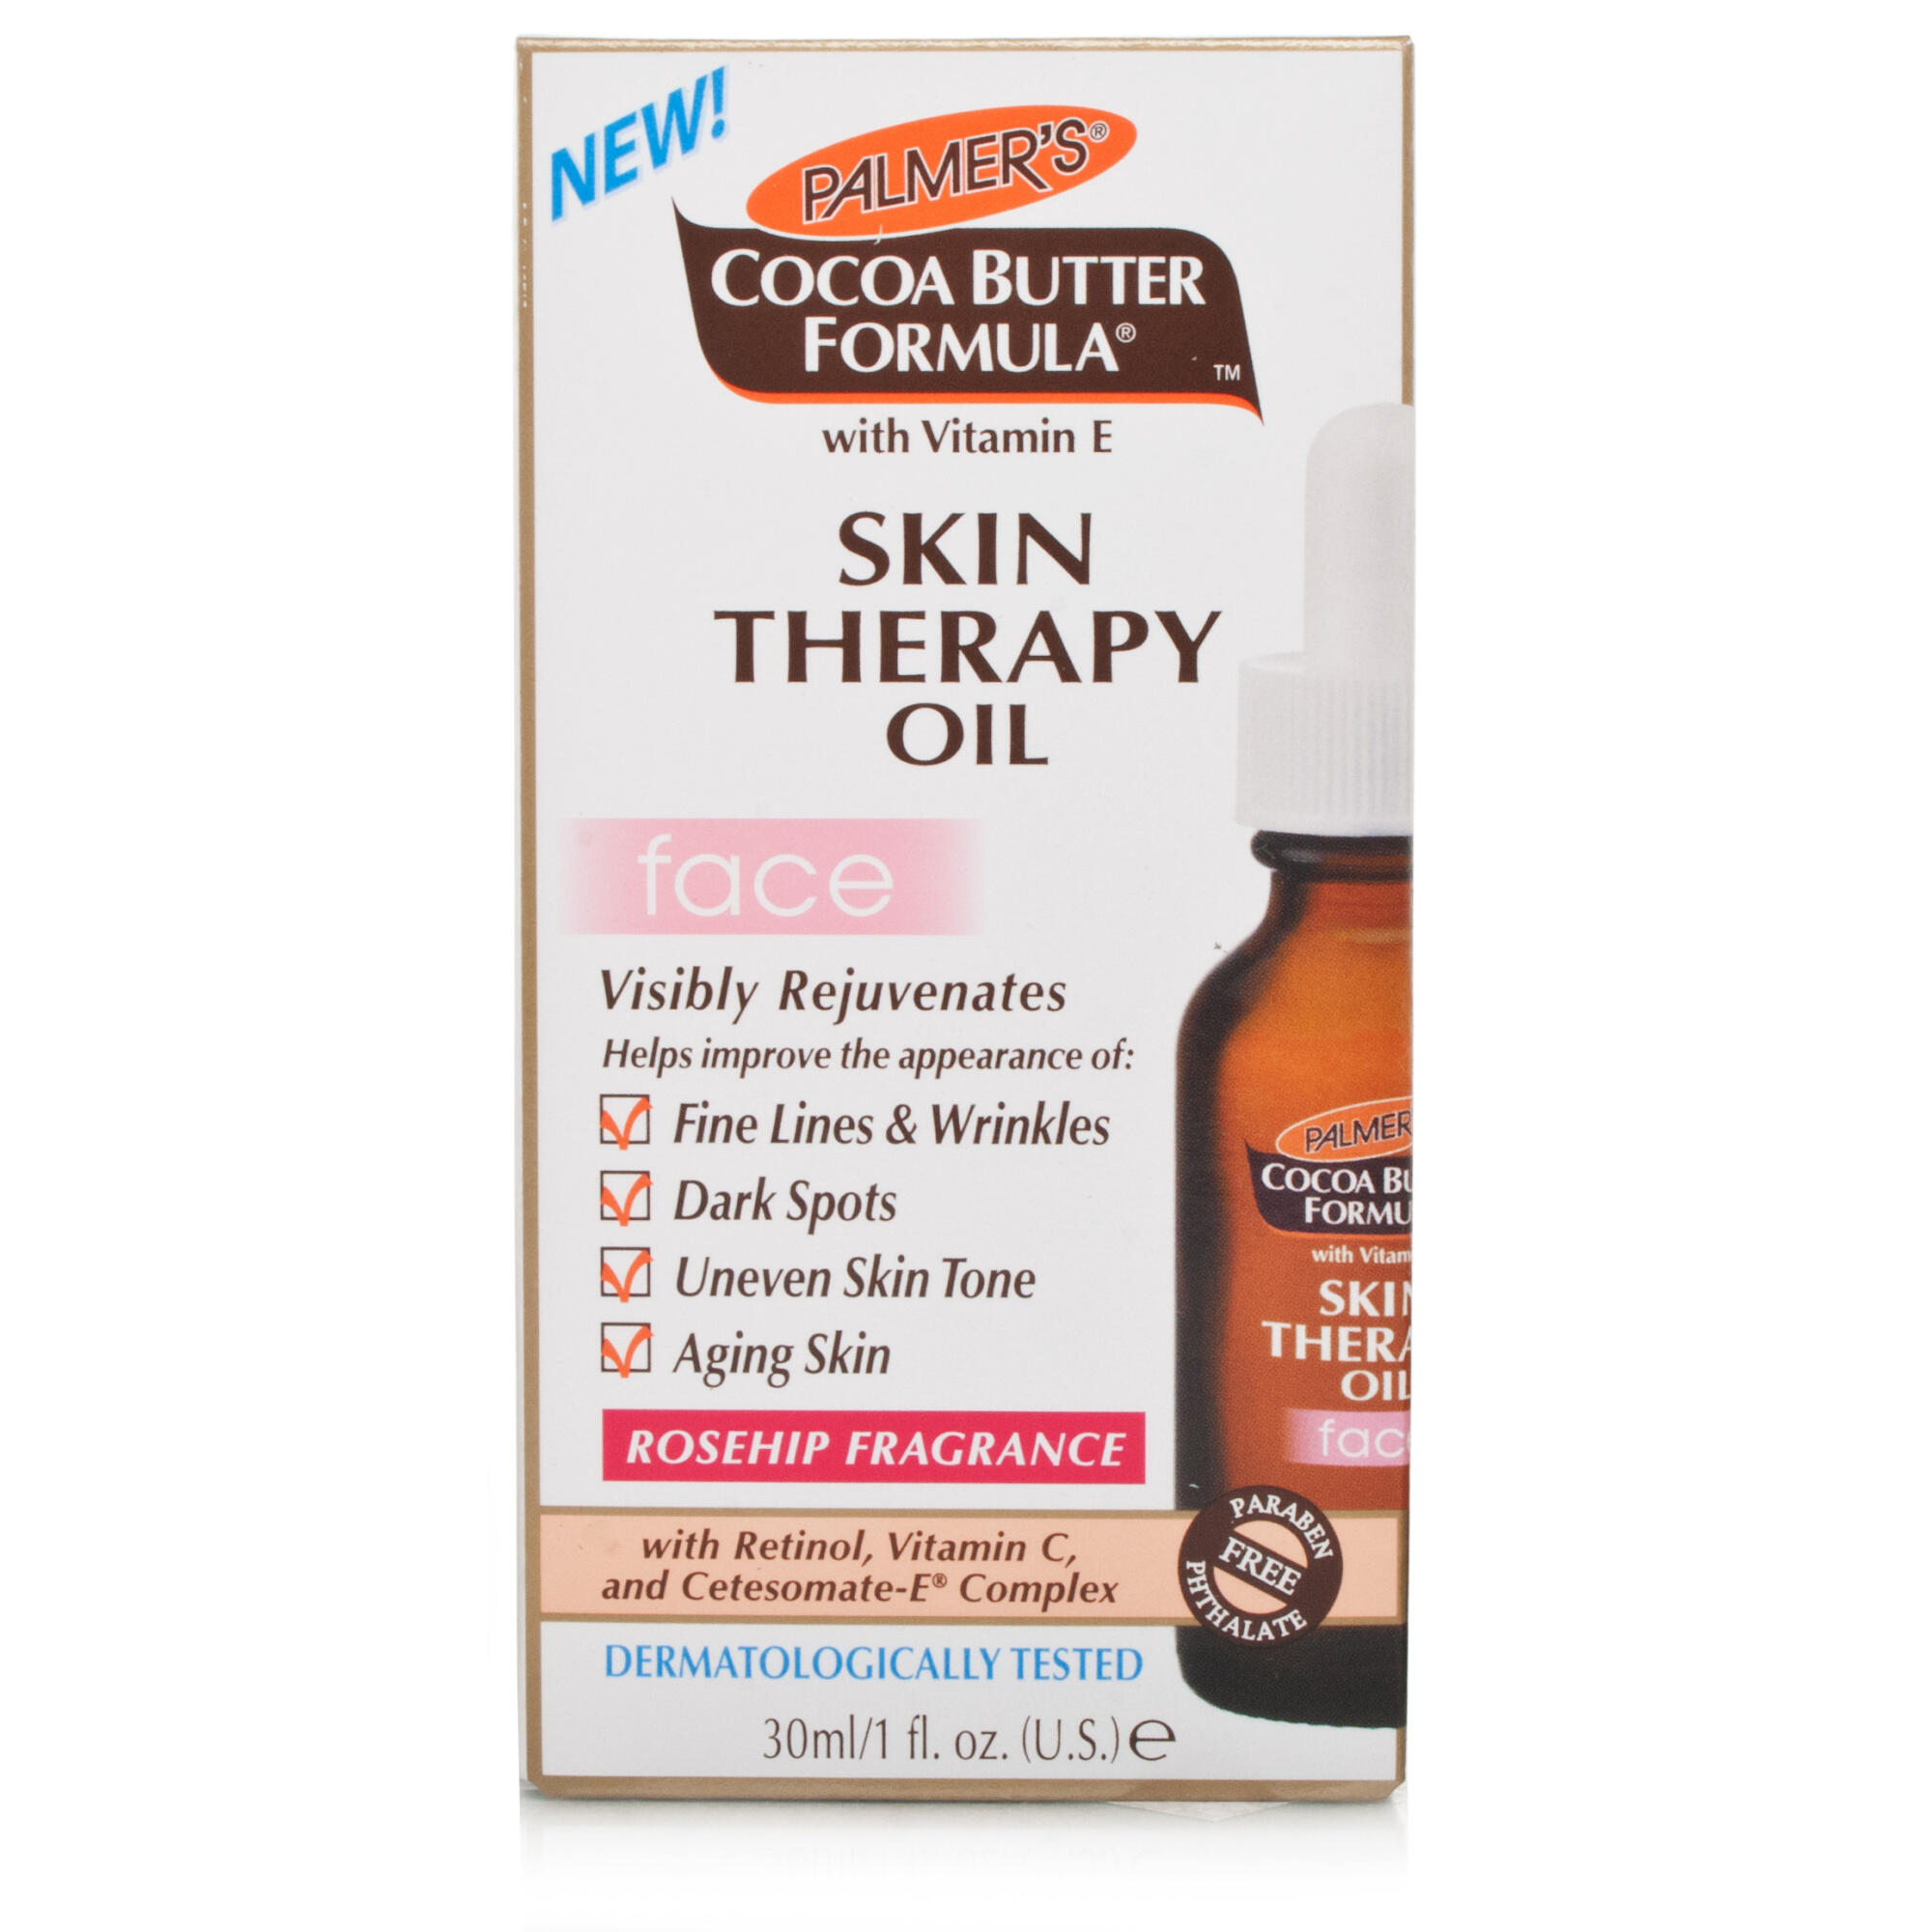 Palmers Cocoa Butter Formula Skin Therapy Oil for Face | Chemist Direct